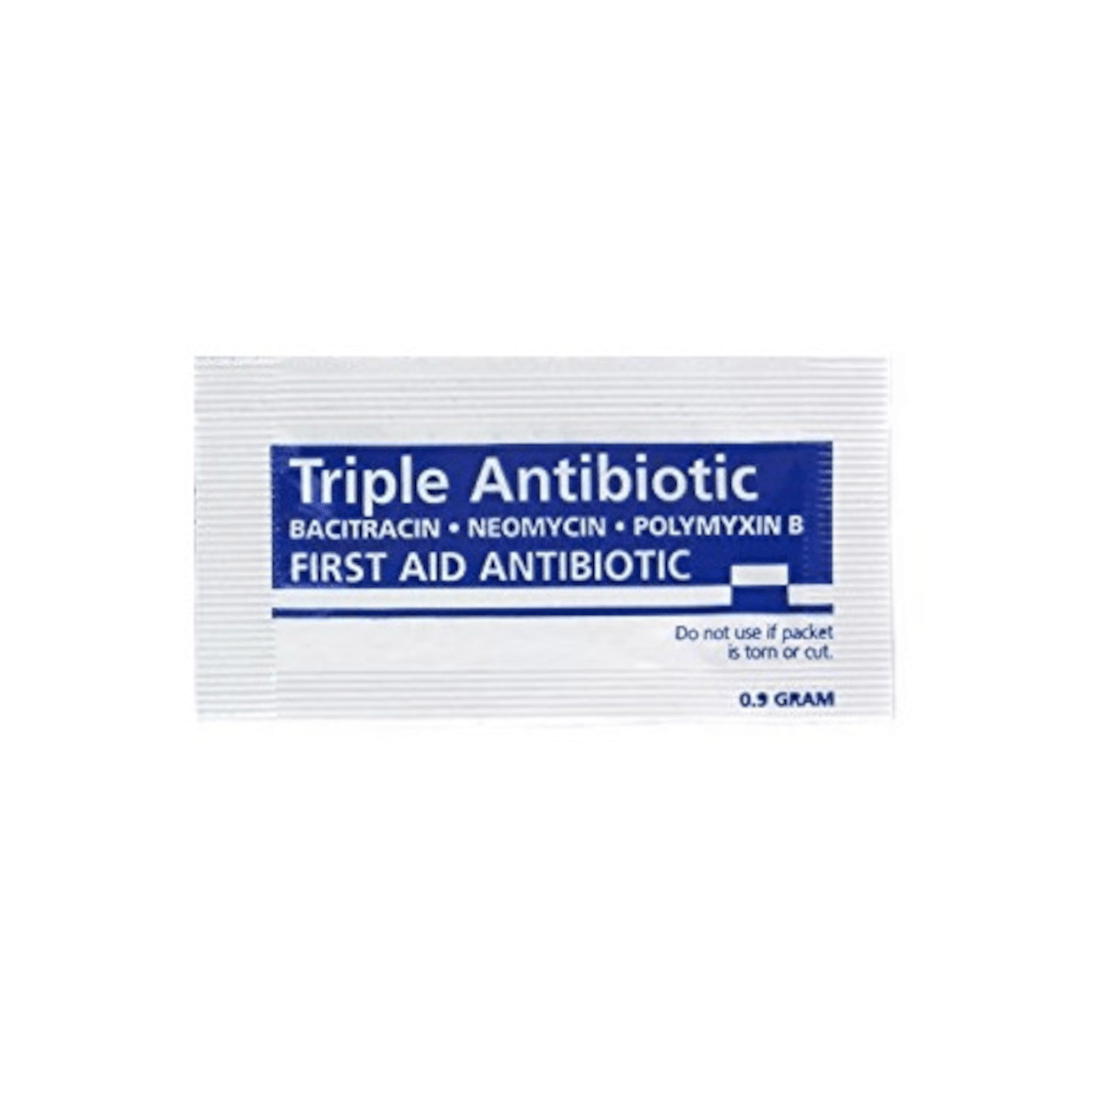 Antibiotic ointment, topical, single-use